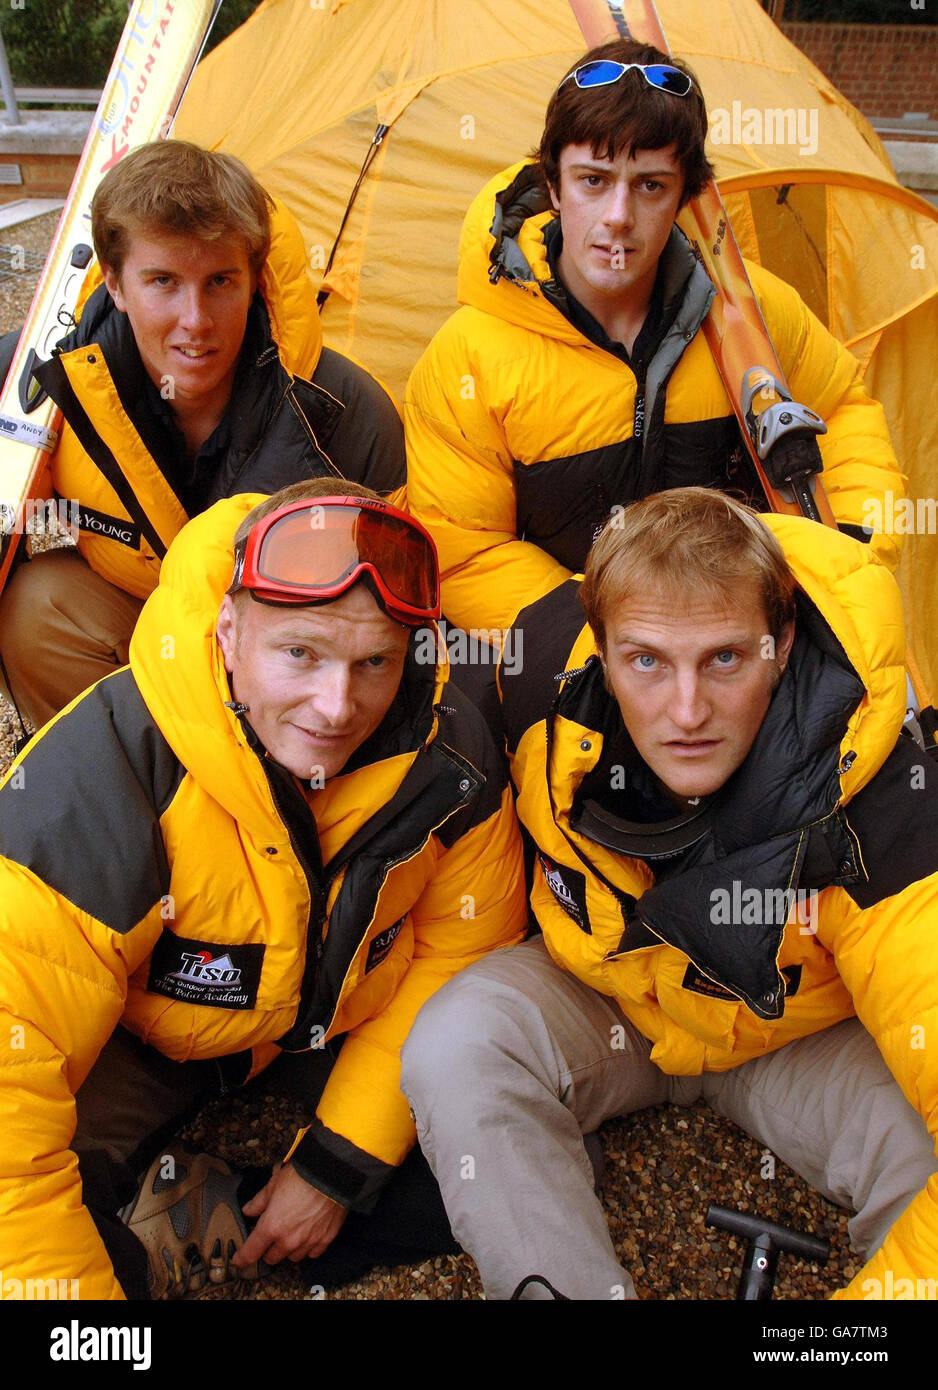 Adam Griffiths (top left) Richard Smith (left) Alex Hibbert (top right) and Andy Wilkinson (right), the Four British adventurers who have today launched a bid to make polar history by trekking 1,000 miles to the South Pole. Stock Photo